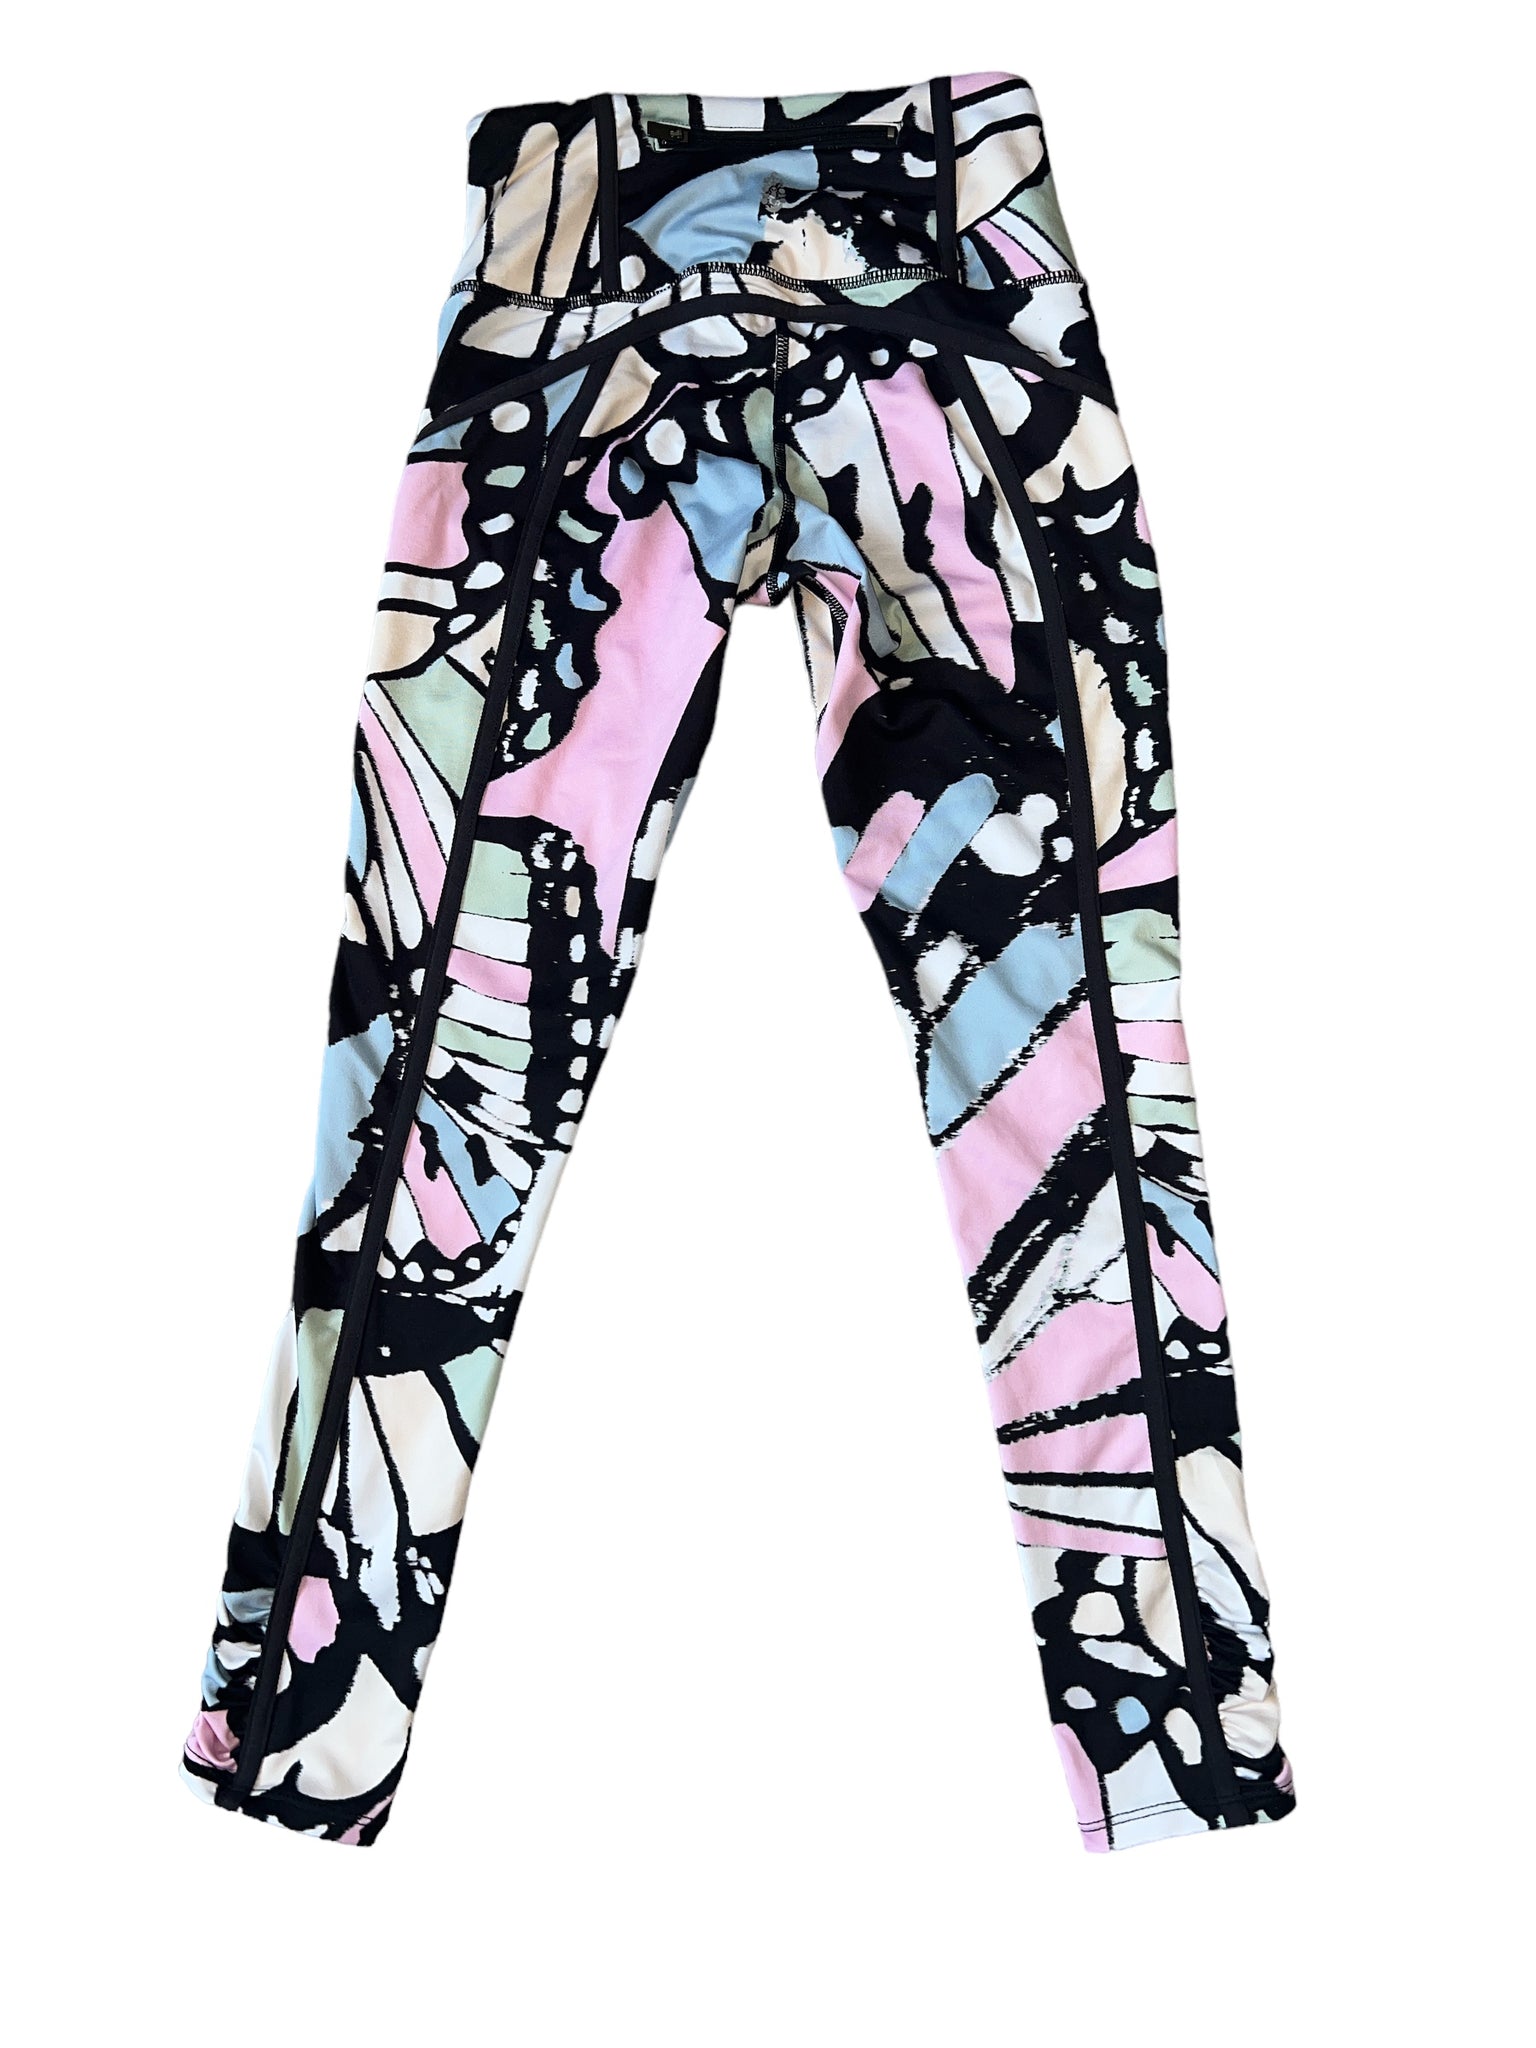 Free People Movement women's butterfly print active leggings XS